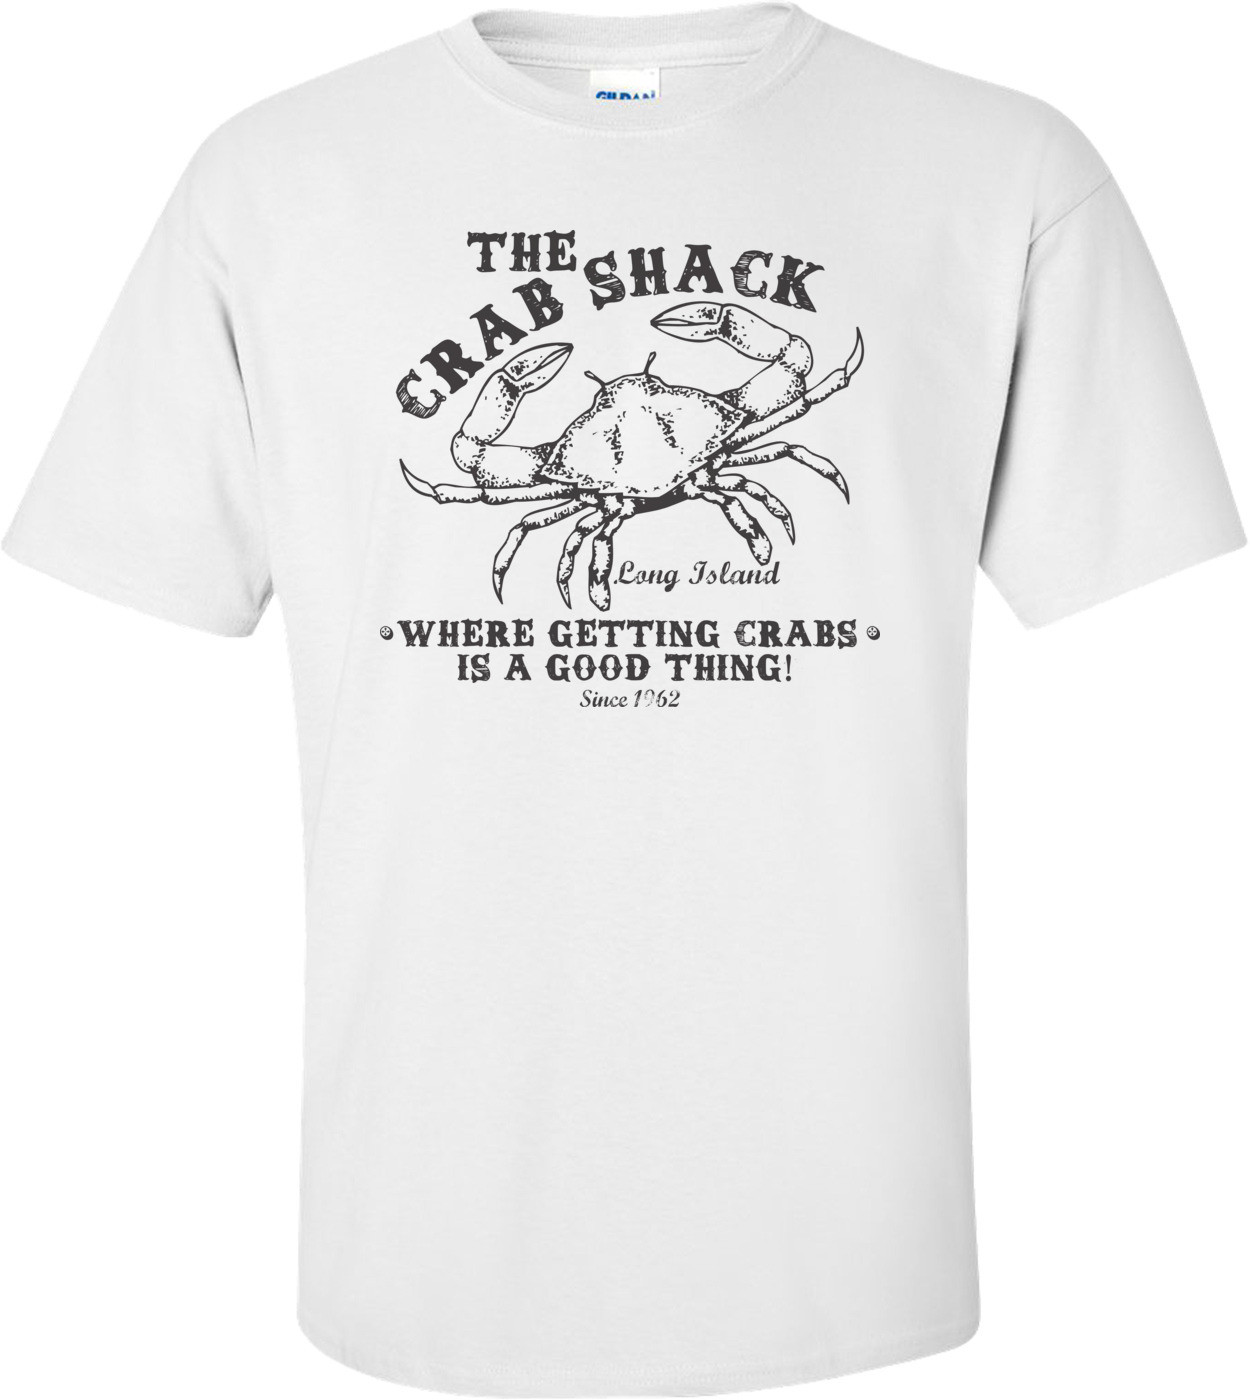 The Crab Shack  